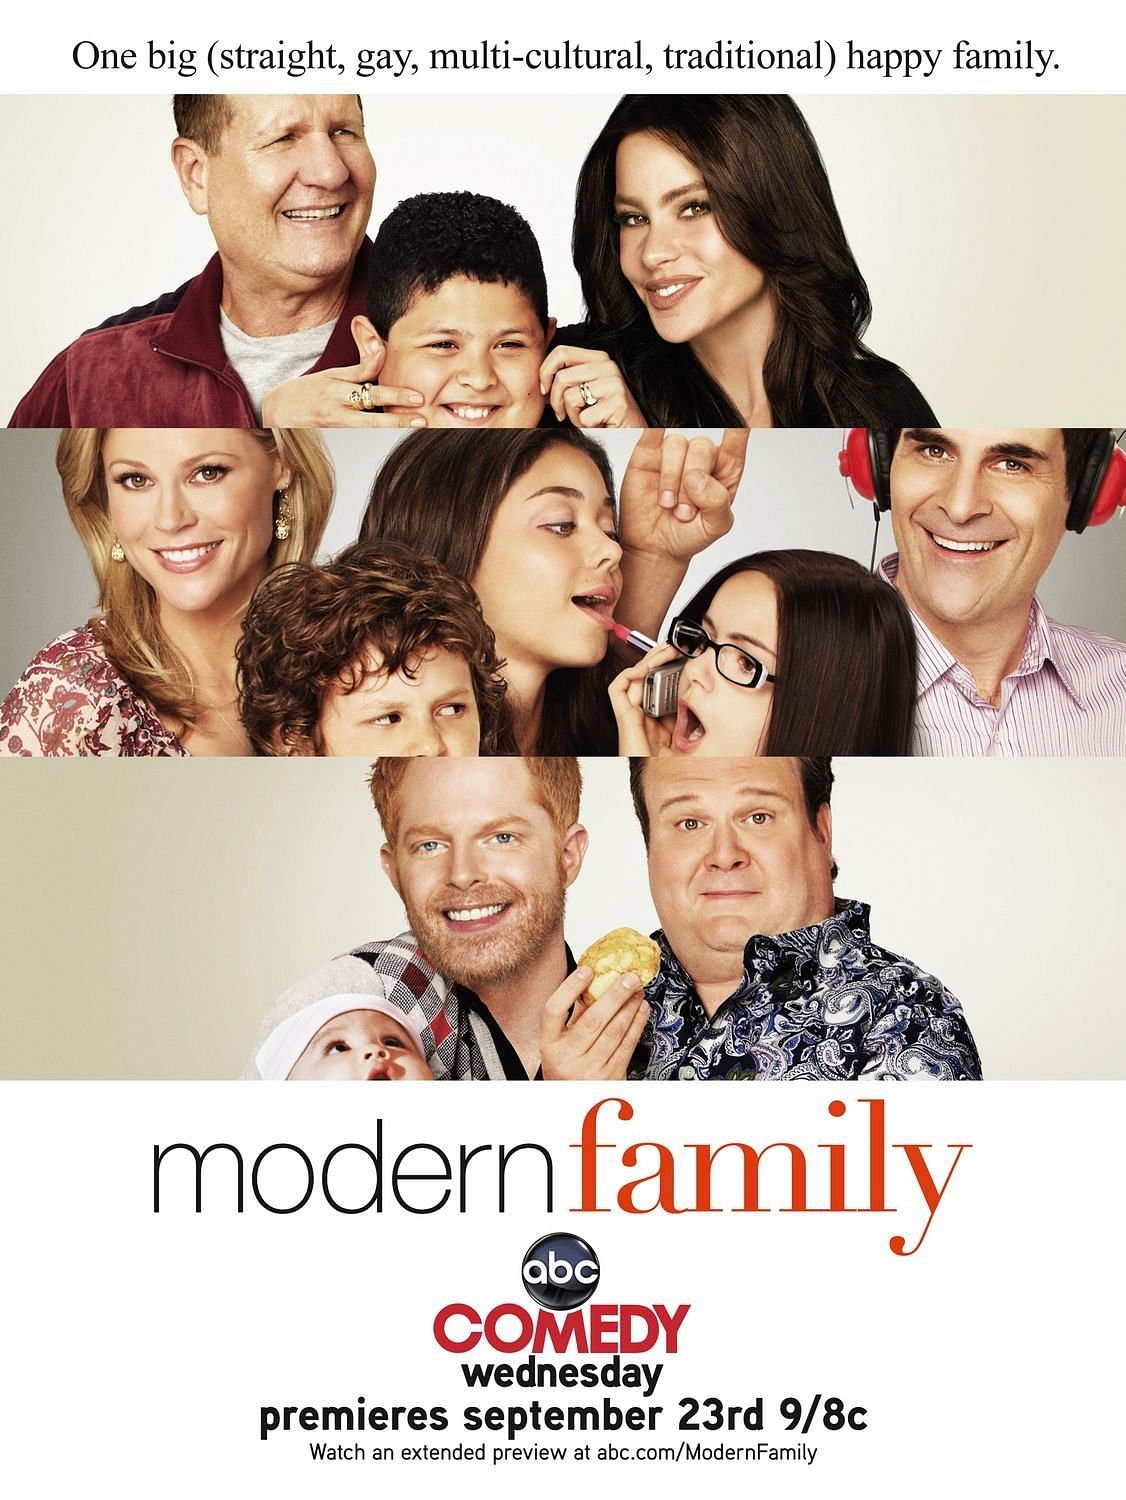 Modern Family takes it a notch further - it’s an entire shot episode on iPhon and iPad